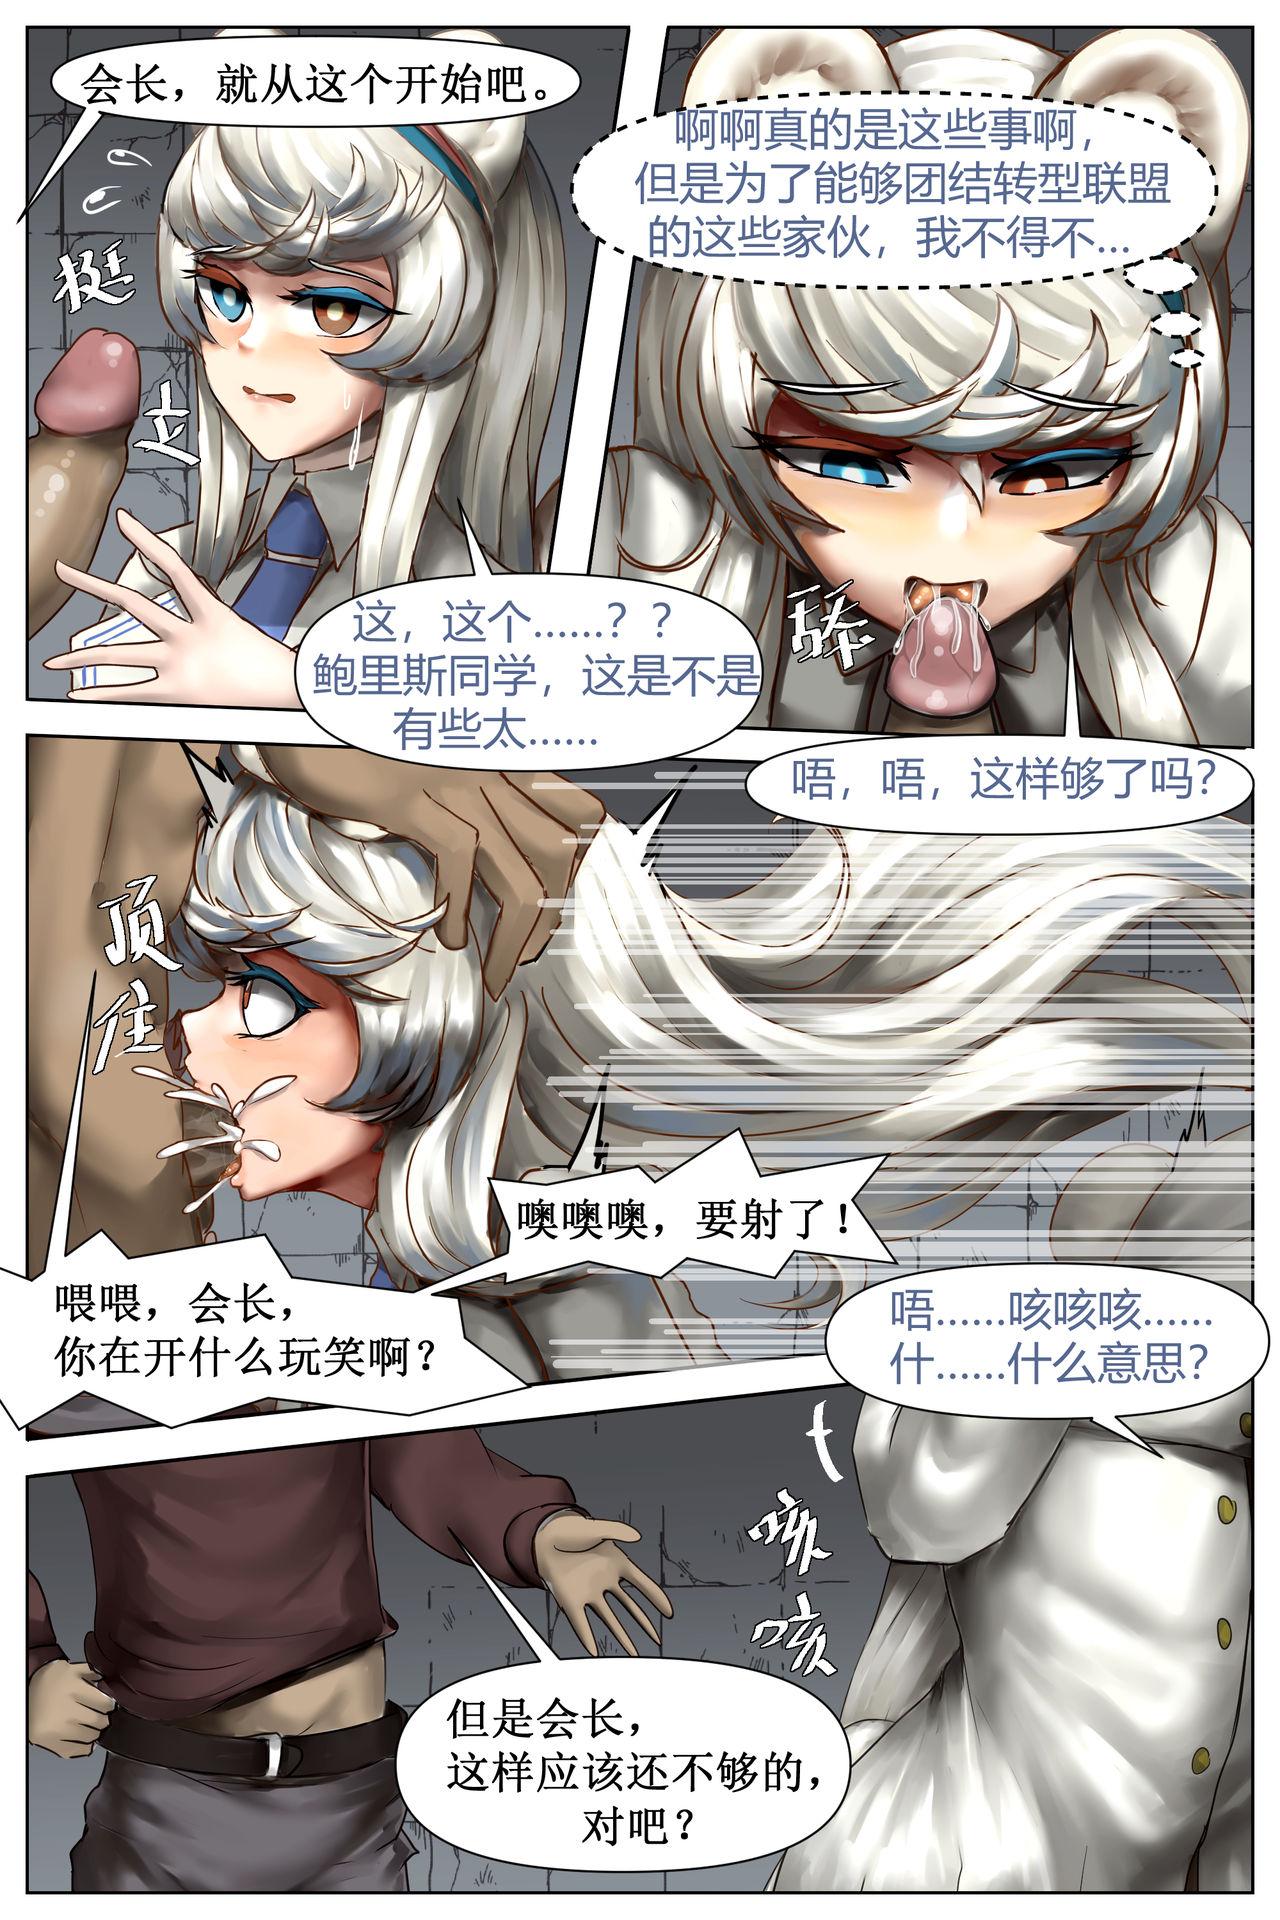 Bdsm 理想者的末路 - Arknights Sexcams - Page 5